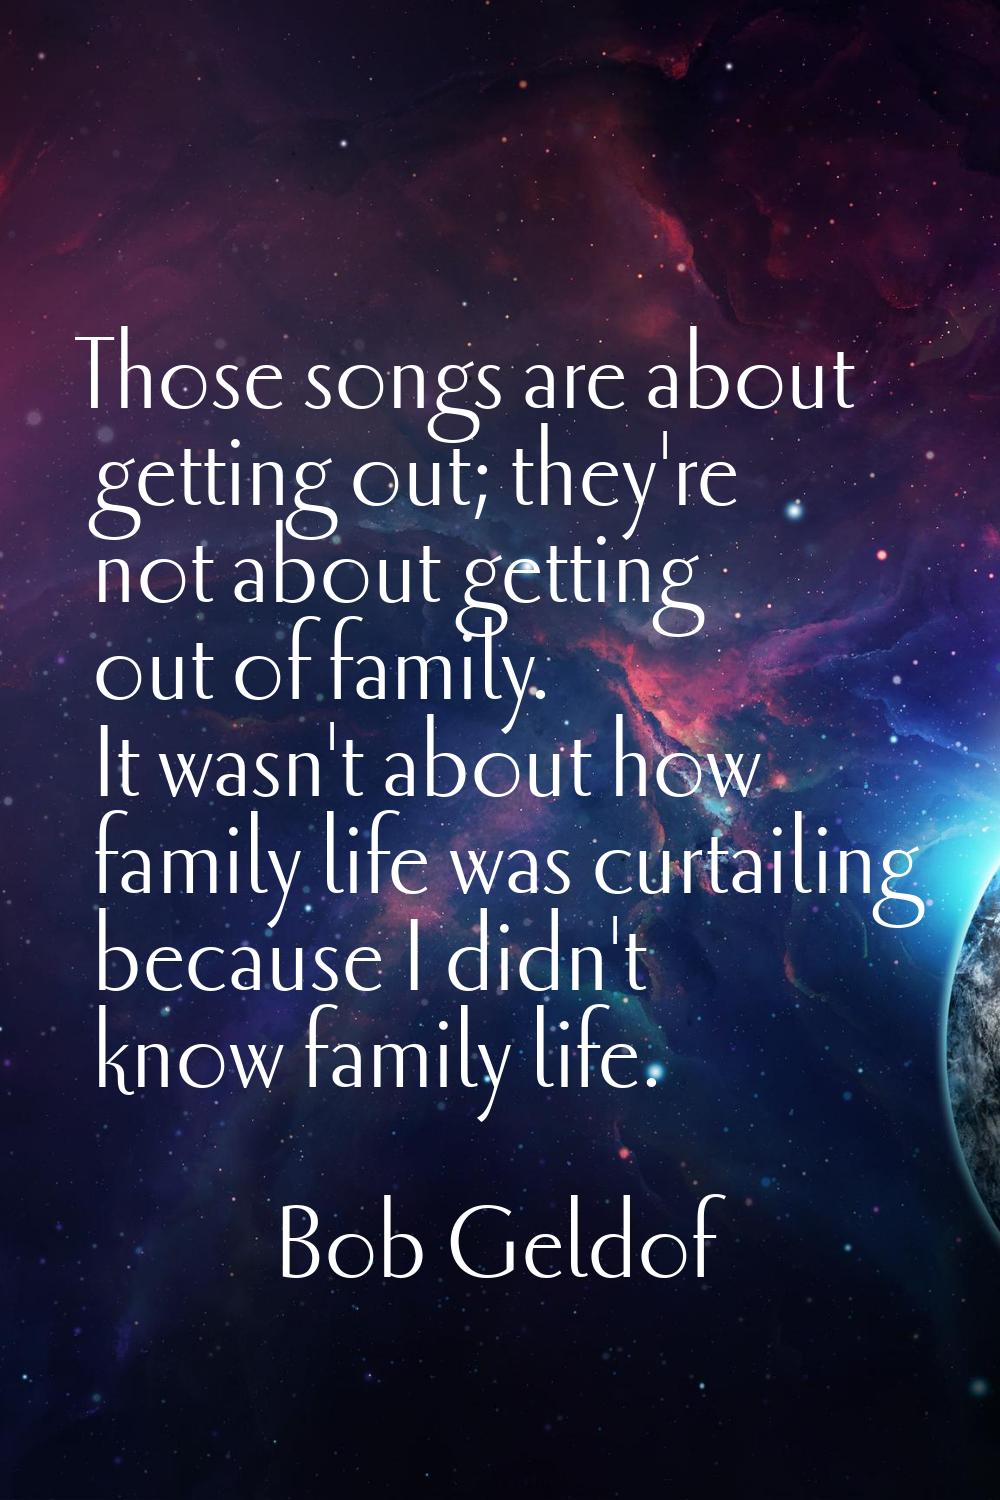 Those songs are about getting out; they're not about getting out of family. It wasn't about how fam